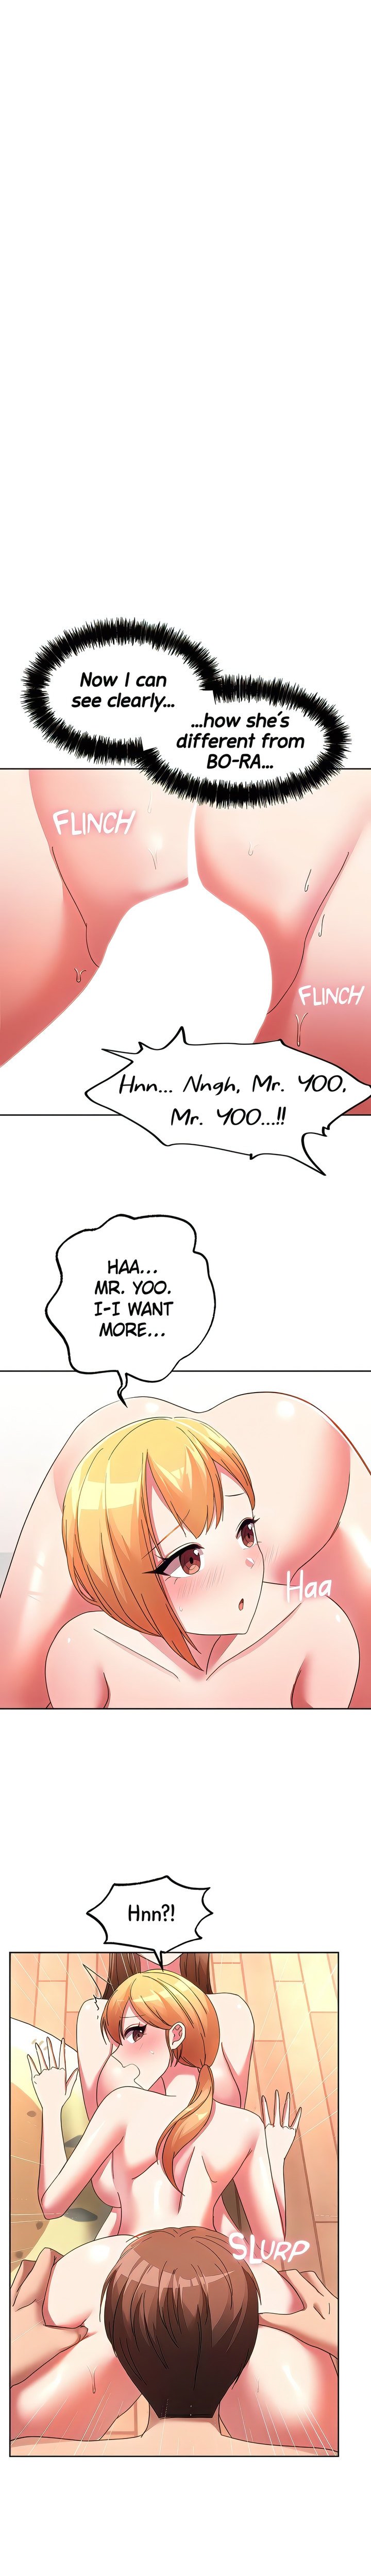 girls-i-used-to-teach-chap-33-11